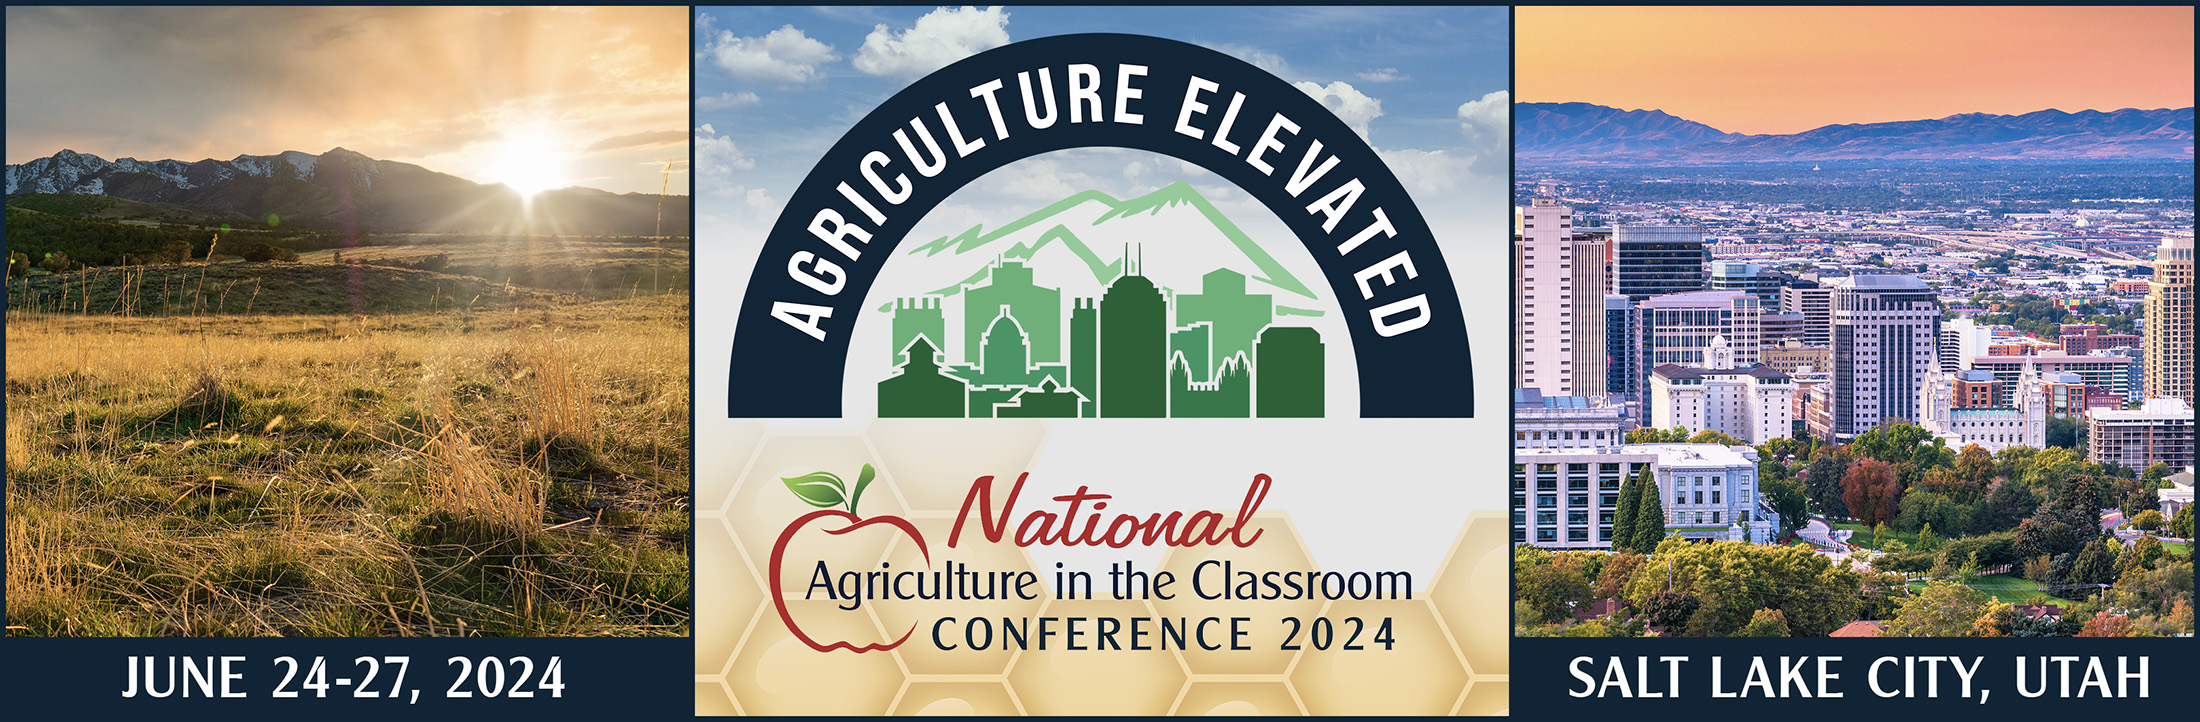 2024 National Agriculture in the Classroom Conference